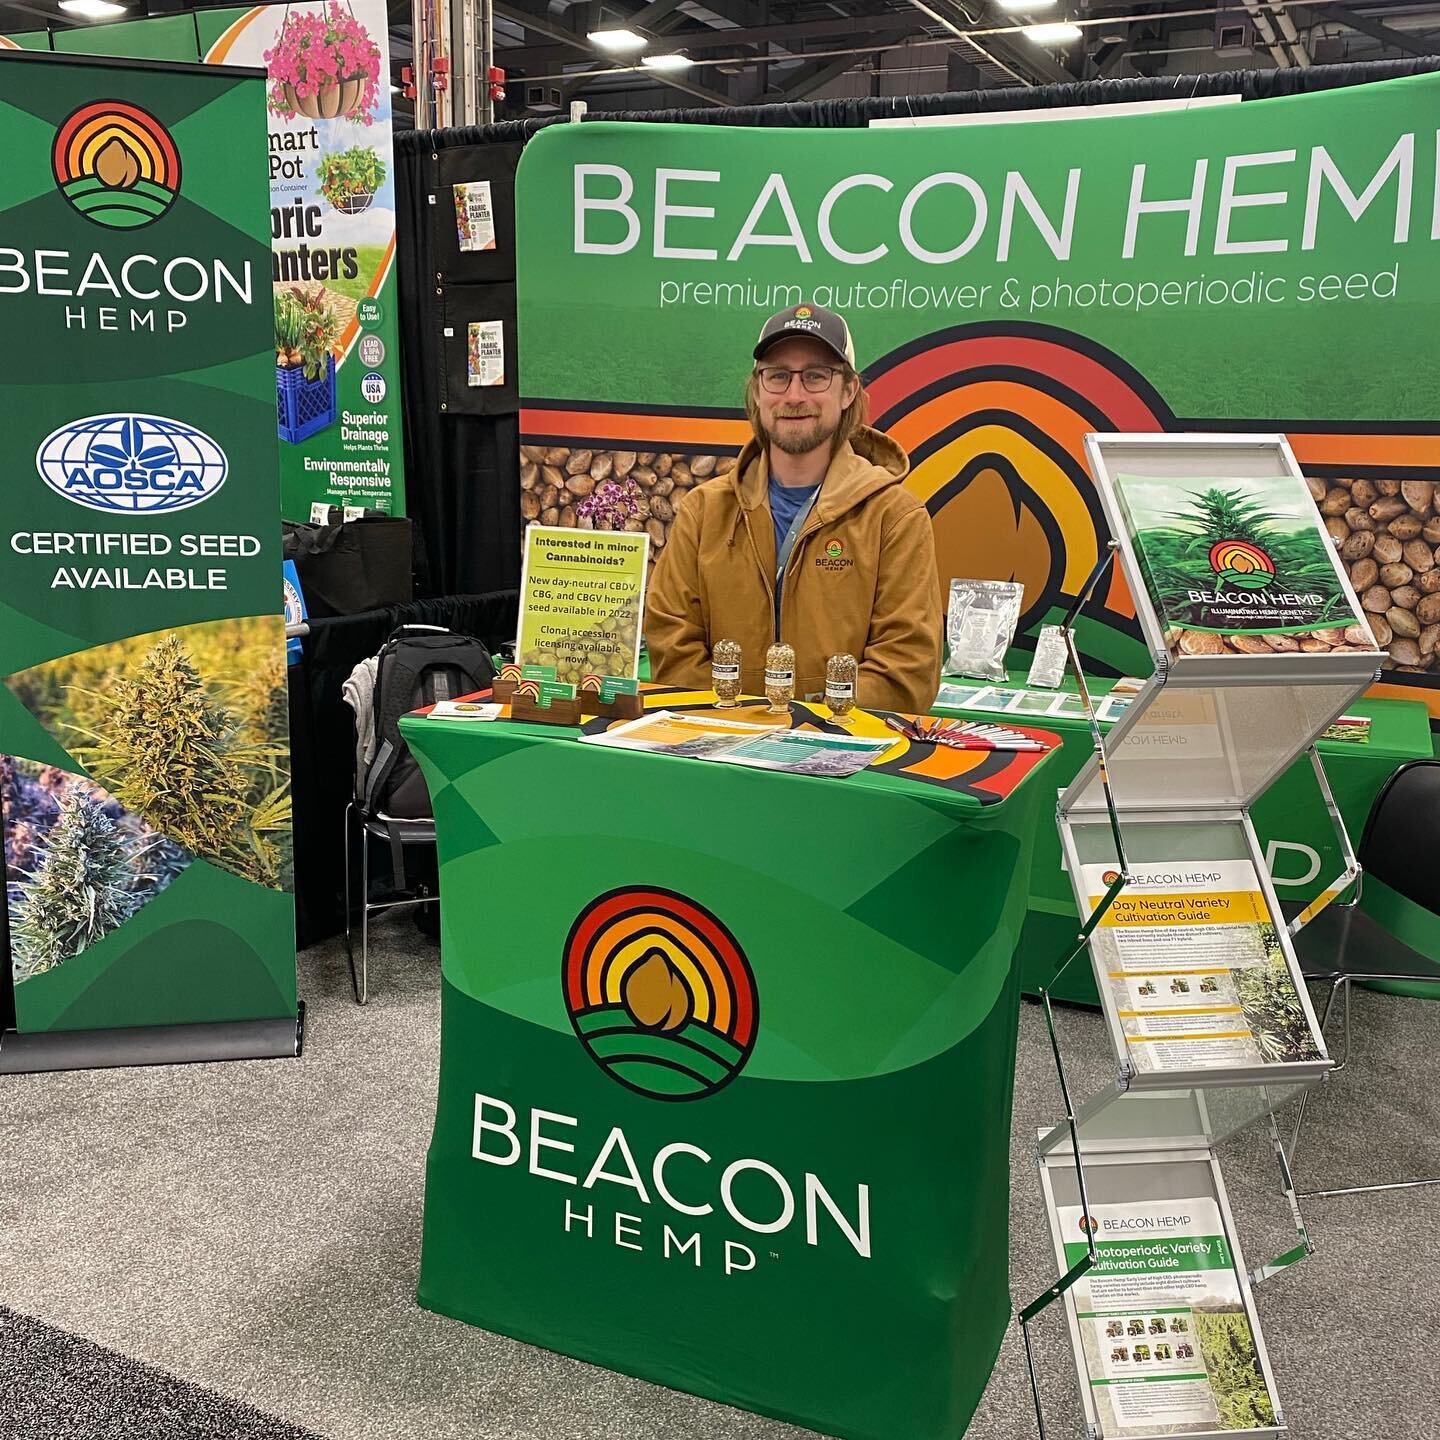 Thank you to everyone that stopped by our booth at #Cultivate21 the past few days. And thanks to @youramericanhort for putting on a great show as always. 

#beaconhemp #industrialhemp #horticulture #hempbreeding #certifiedhempseed #industrialhempfarm